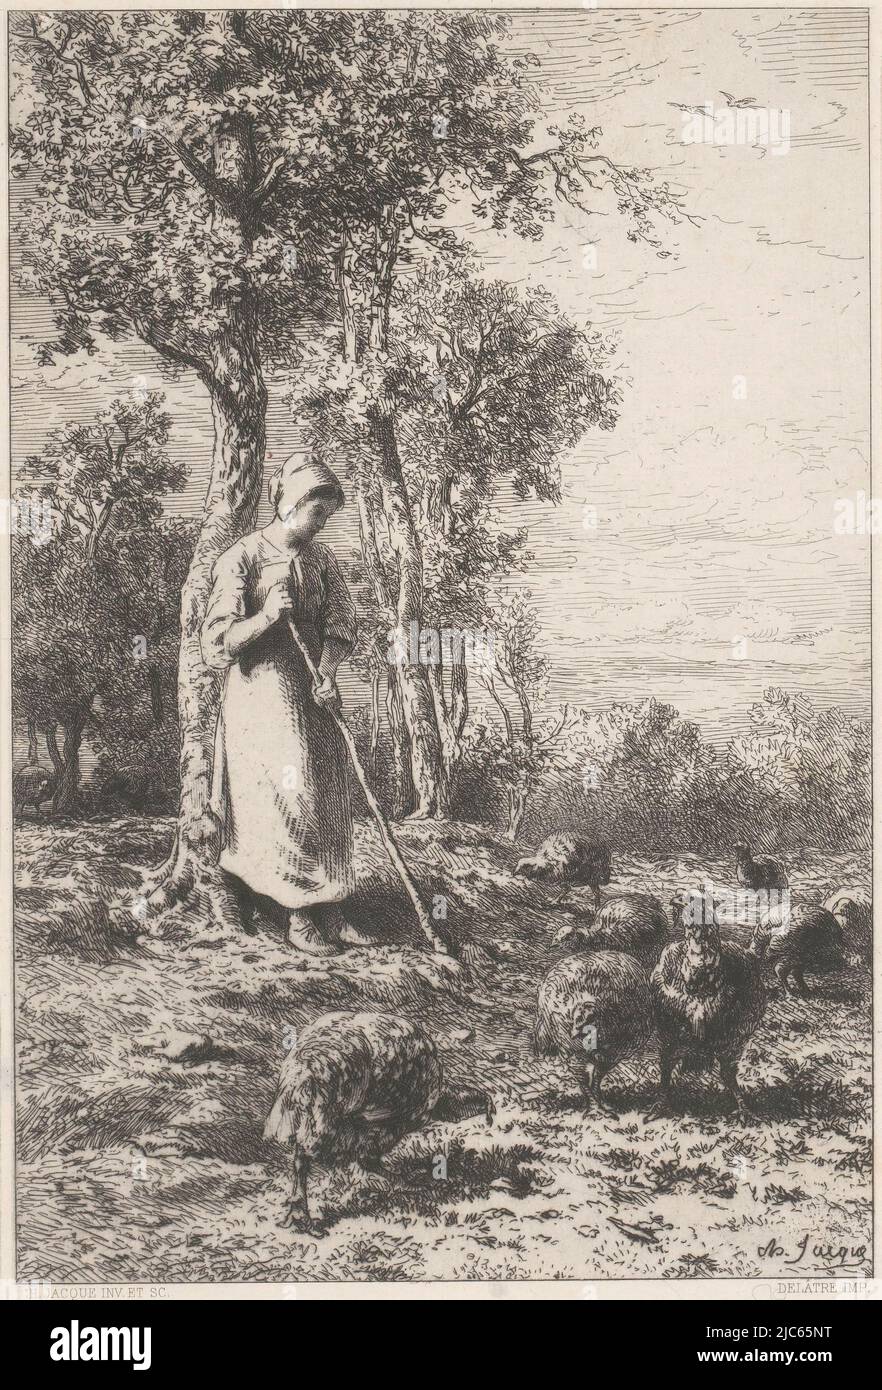 Woman working among chickens Le gardeuse des dindons, print maker: Charles Emile Jacque, (mentioned on object), Charles Emile Jacque, (mentioned on object), printer: Sarazin (drukker), (mentioned on object), print maker: France, printer: Paris, 1865, paper, etching, drypoint, engraving, h 110 mm - w 179 mm Stock Photo